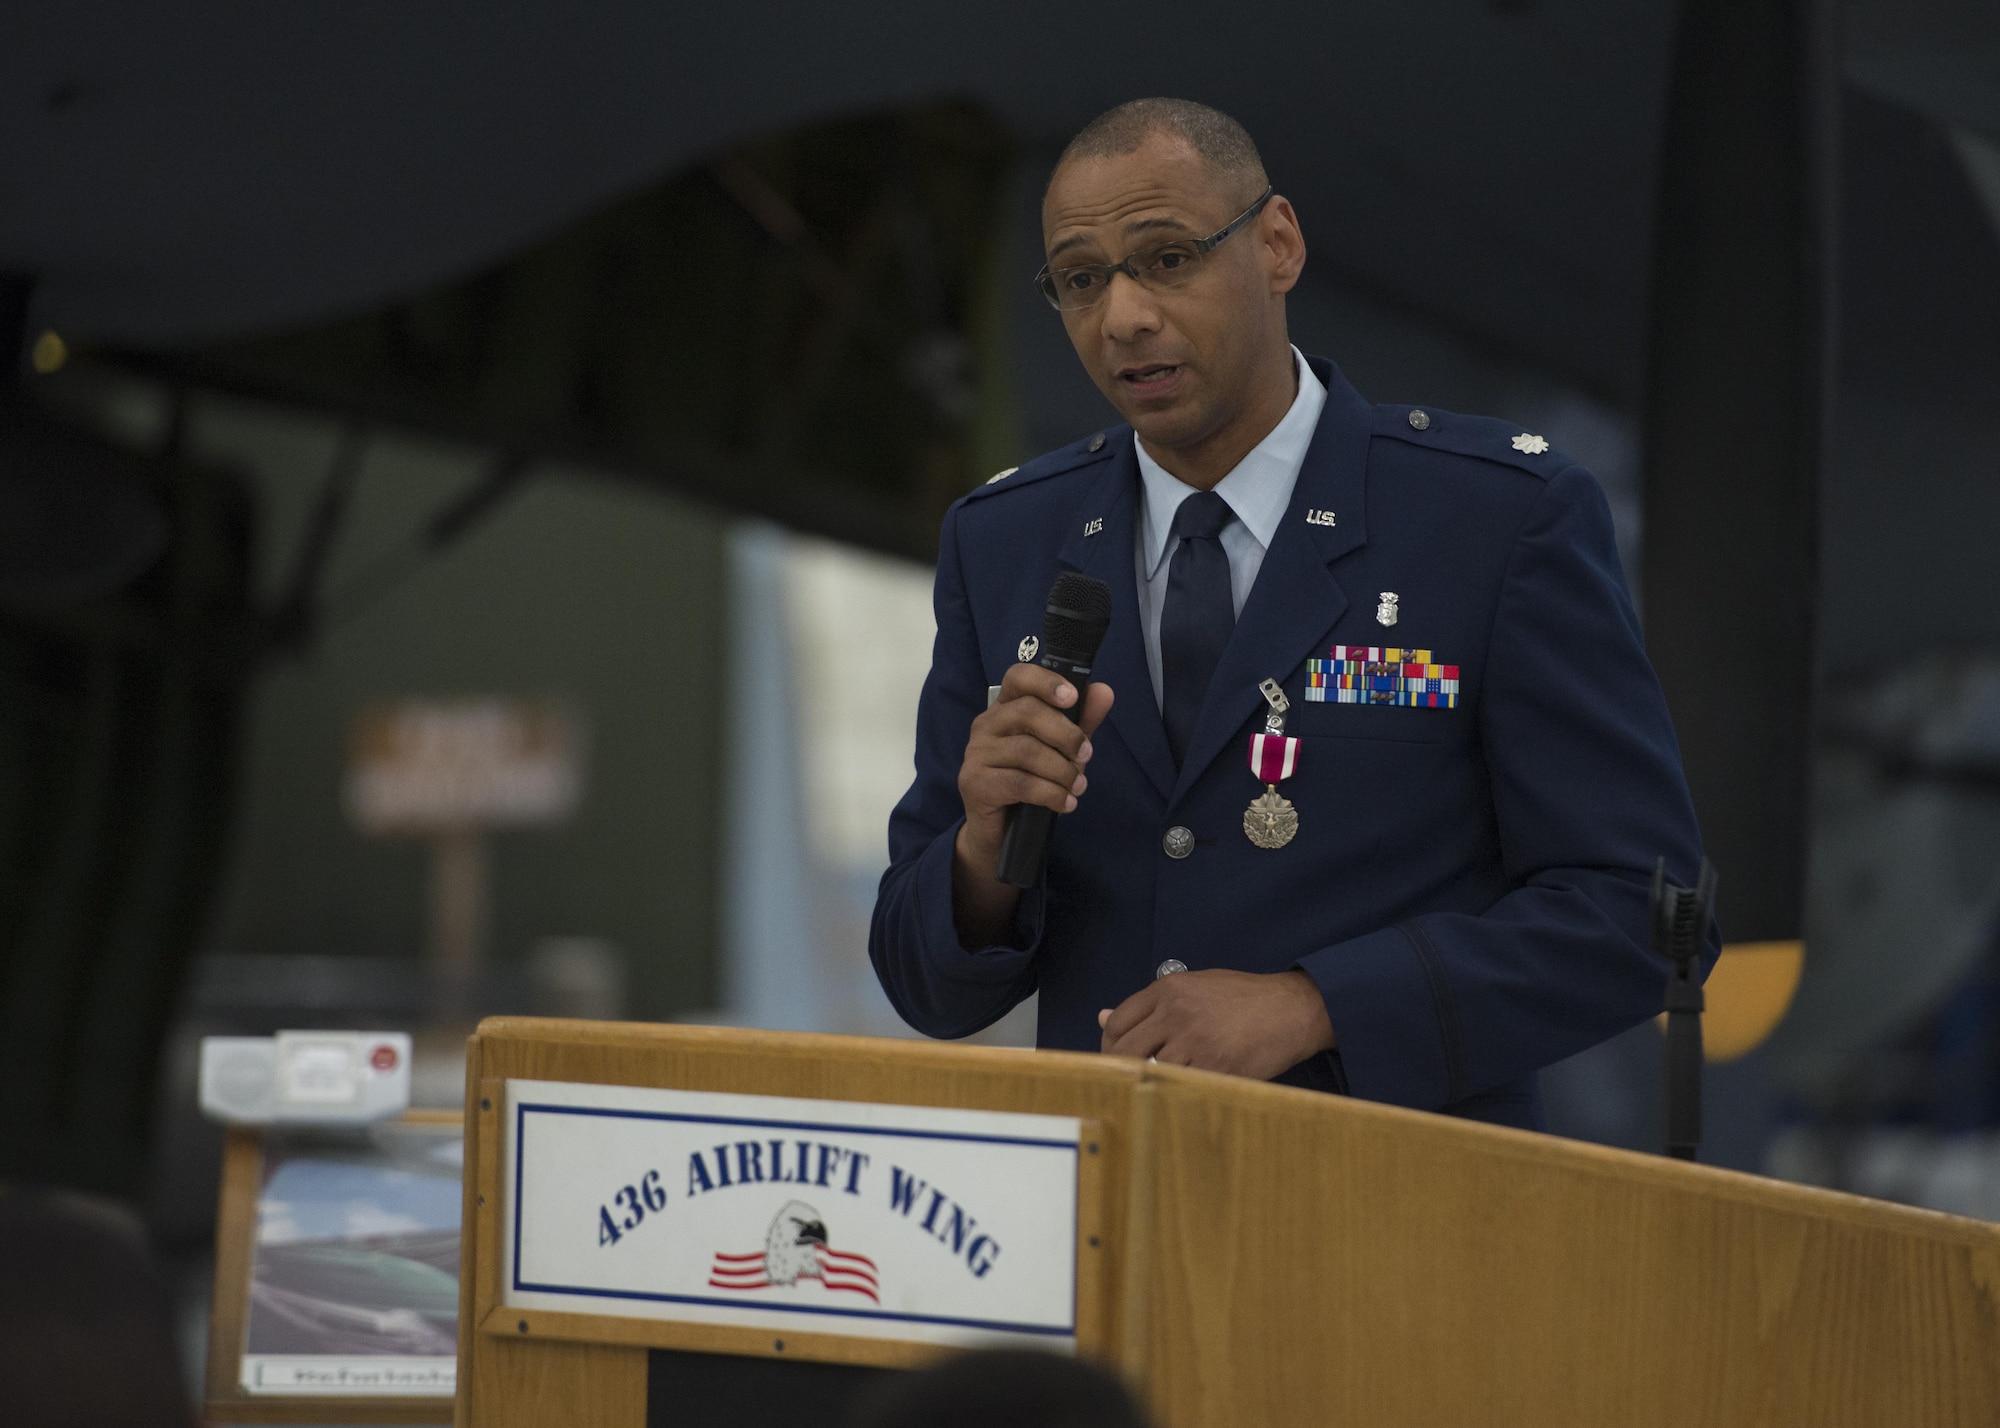 Lt. Col. Eric Baugh, 436th Dental Squadron out-going commander, addresses his squadron and an audience during the 436th Dental Squadron Inactivation Ceremony on June 28, 2016, at the Air Mobility Command Museum on Dover Air Force Base, Del. Baugh has commanded the 436th DS since July 2014. (U.S. Air Force photo/Senior Airman Zachary Cacicia)